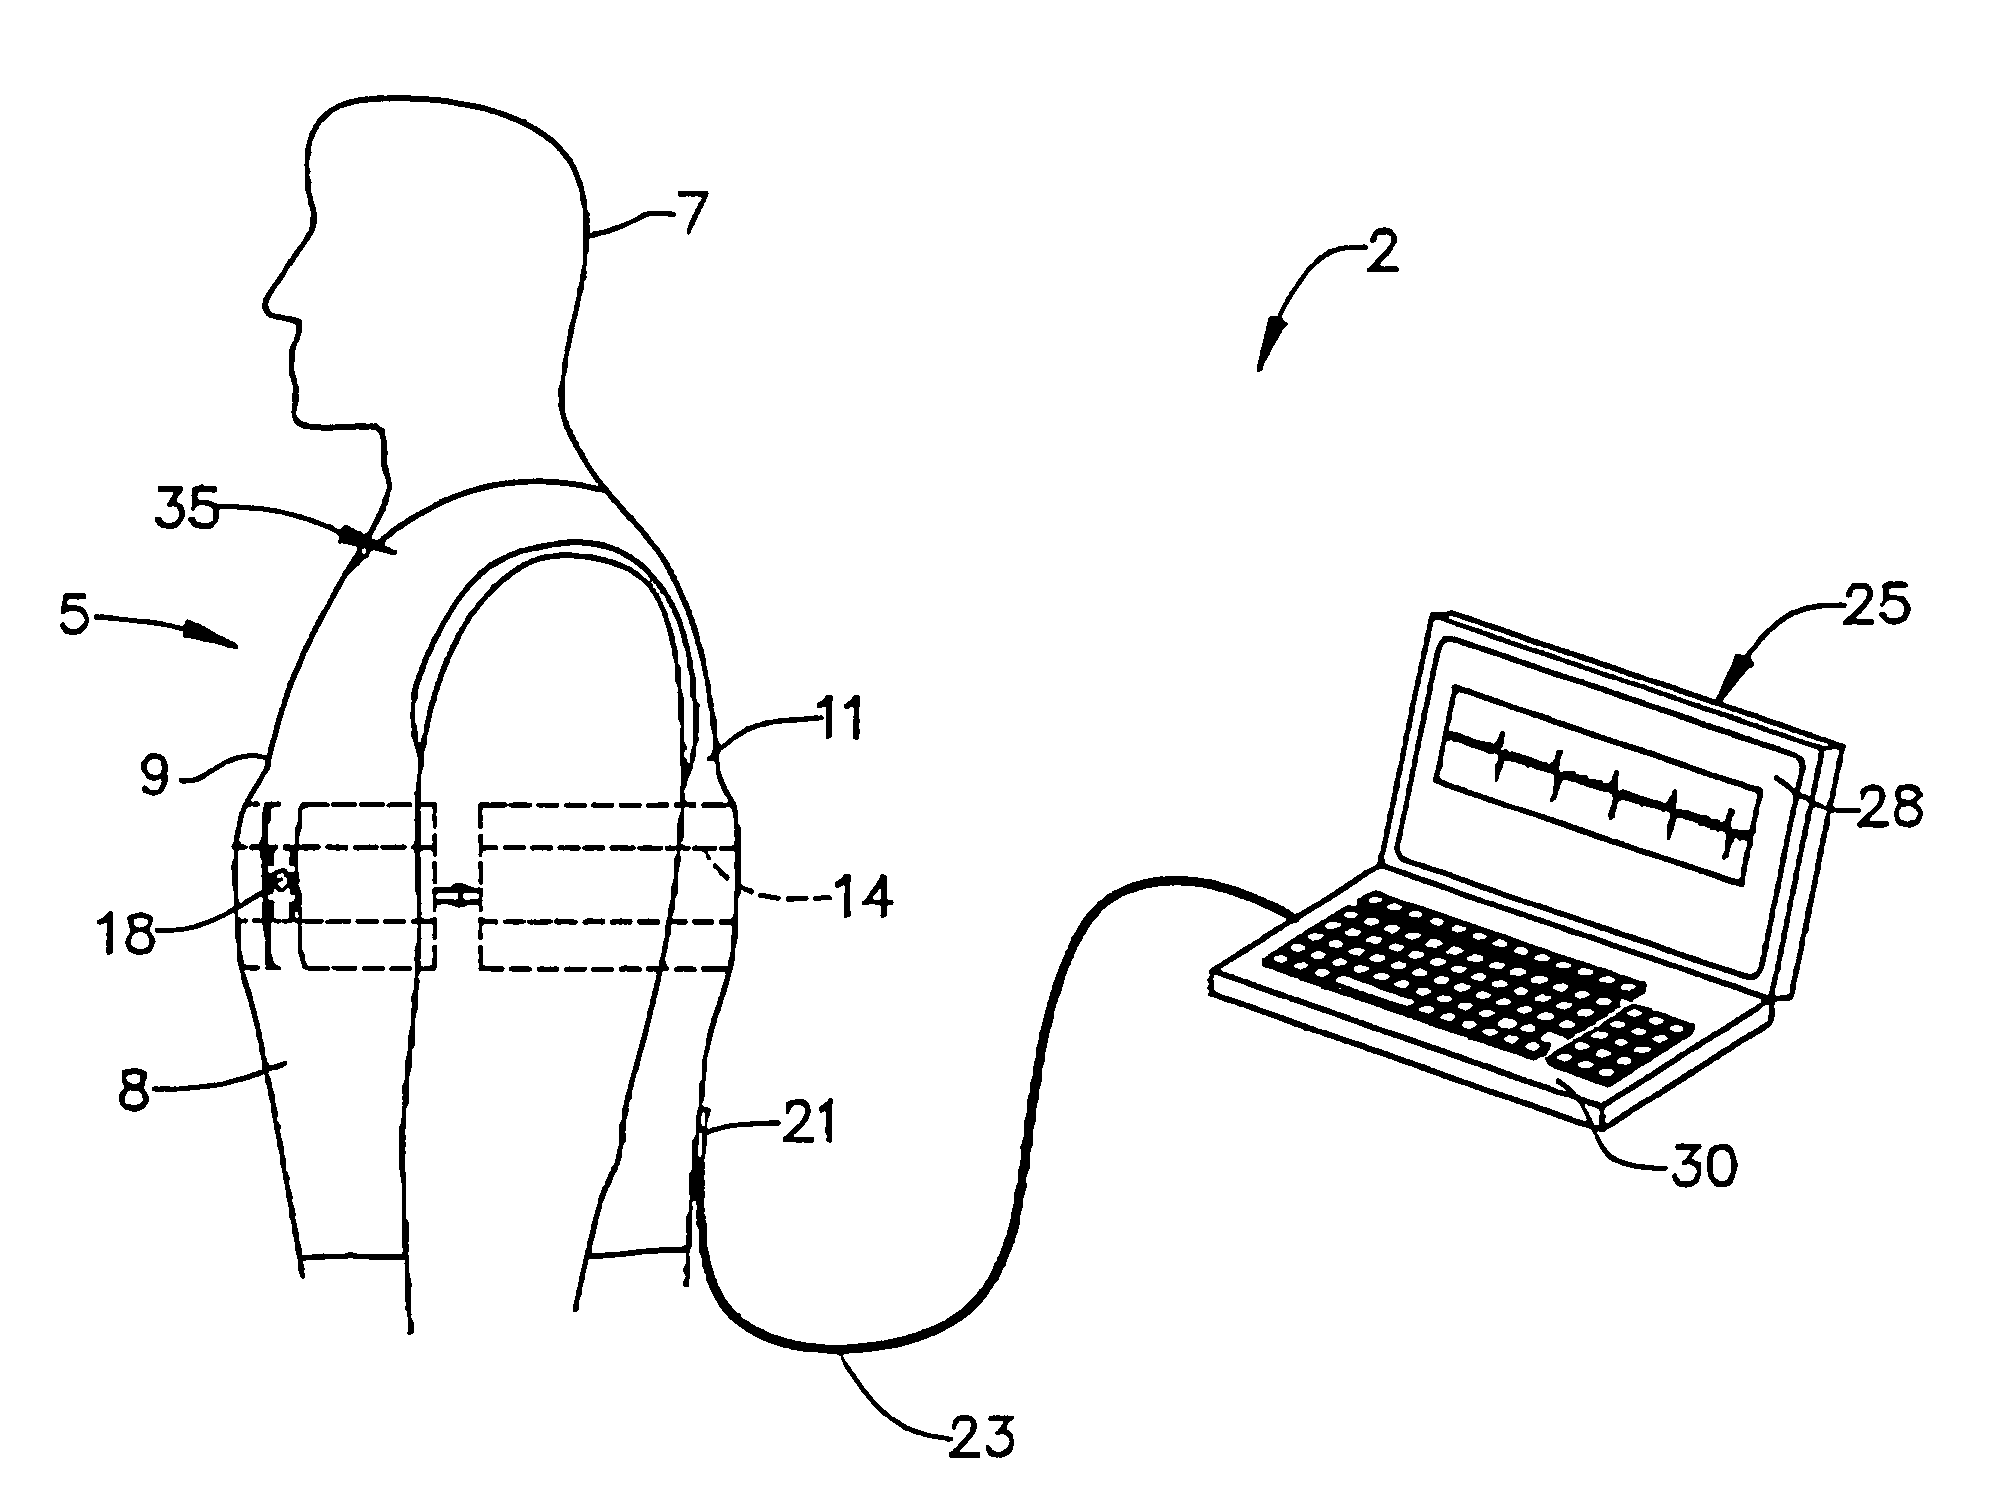 Garment incorporating embedded physiological sensors